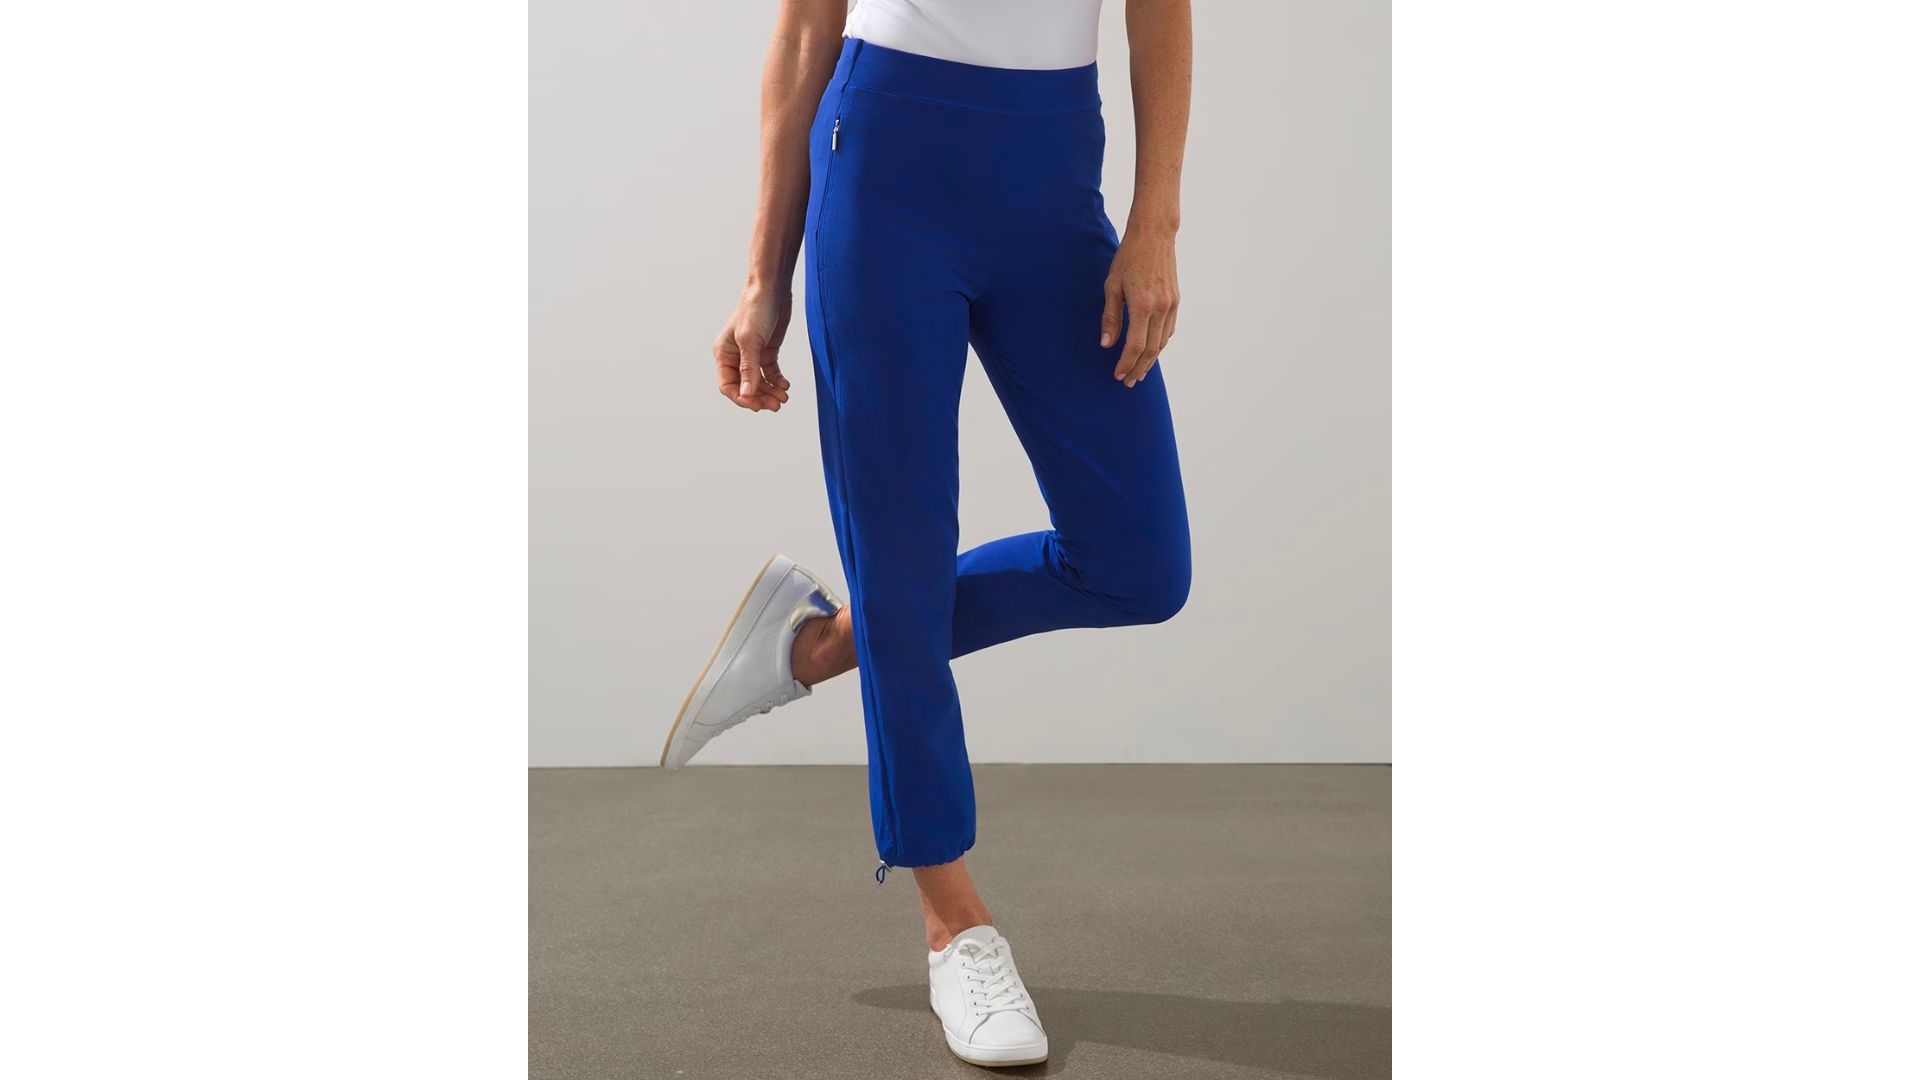 Best Workout Clothes For Women Over 50